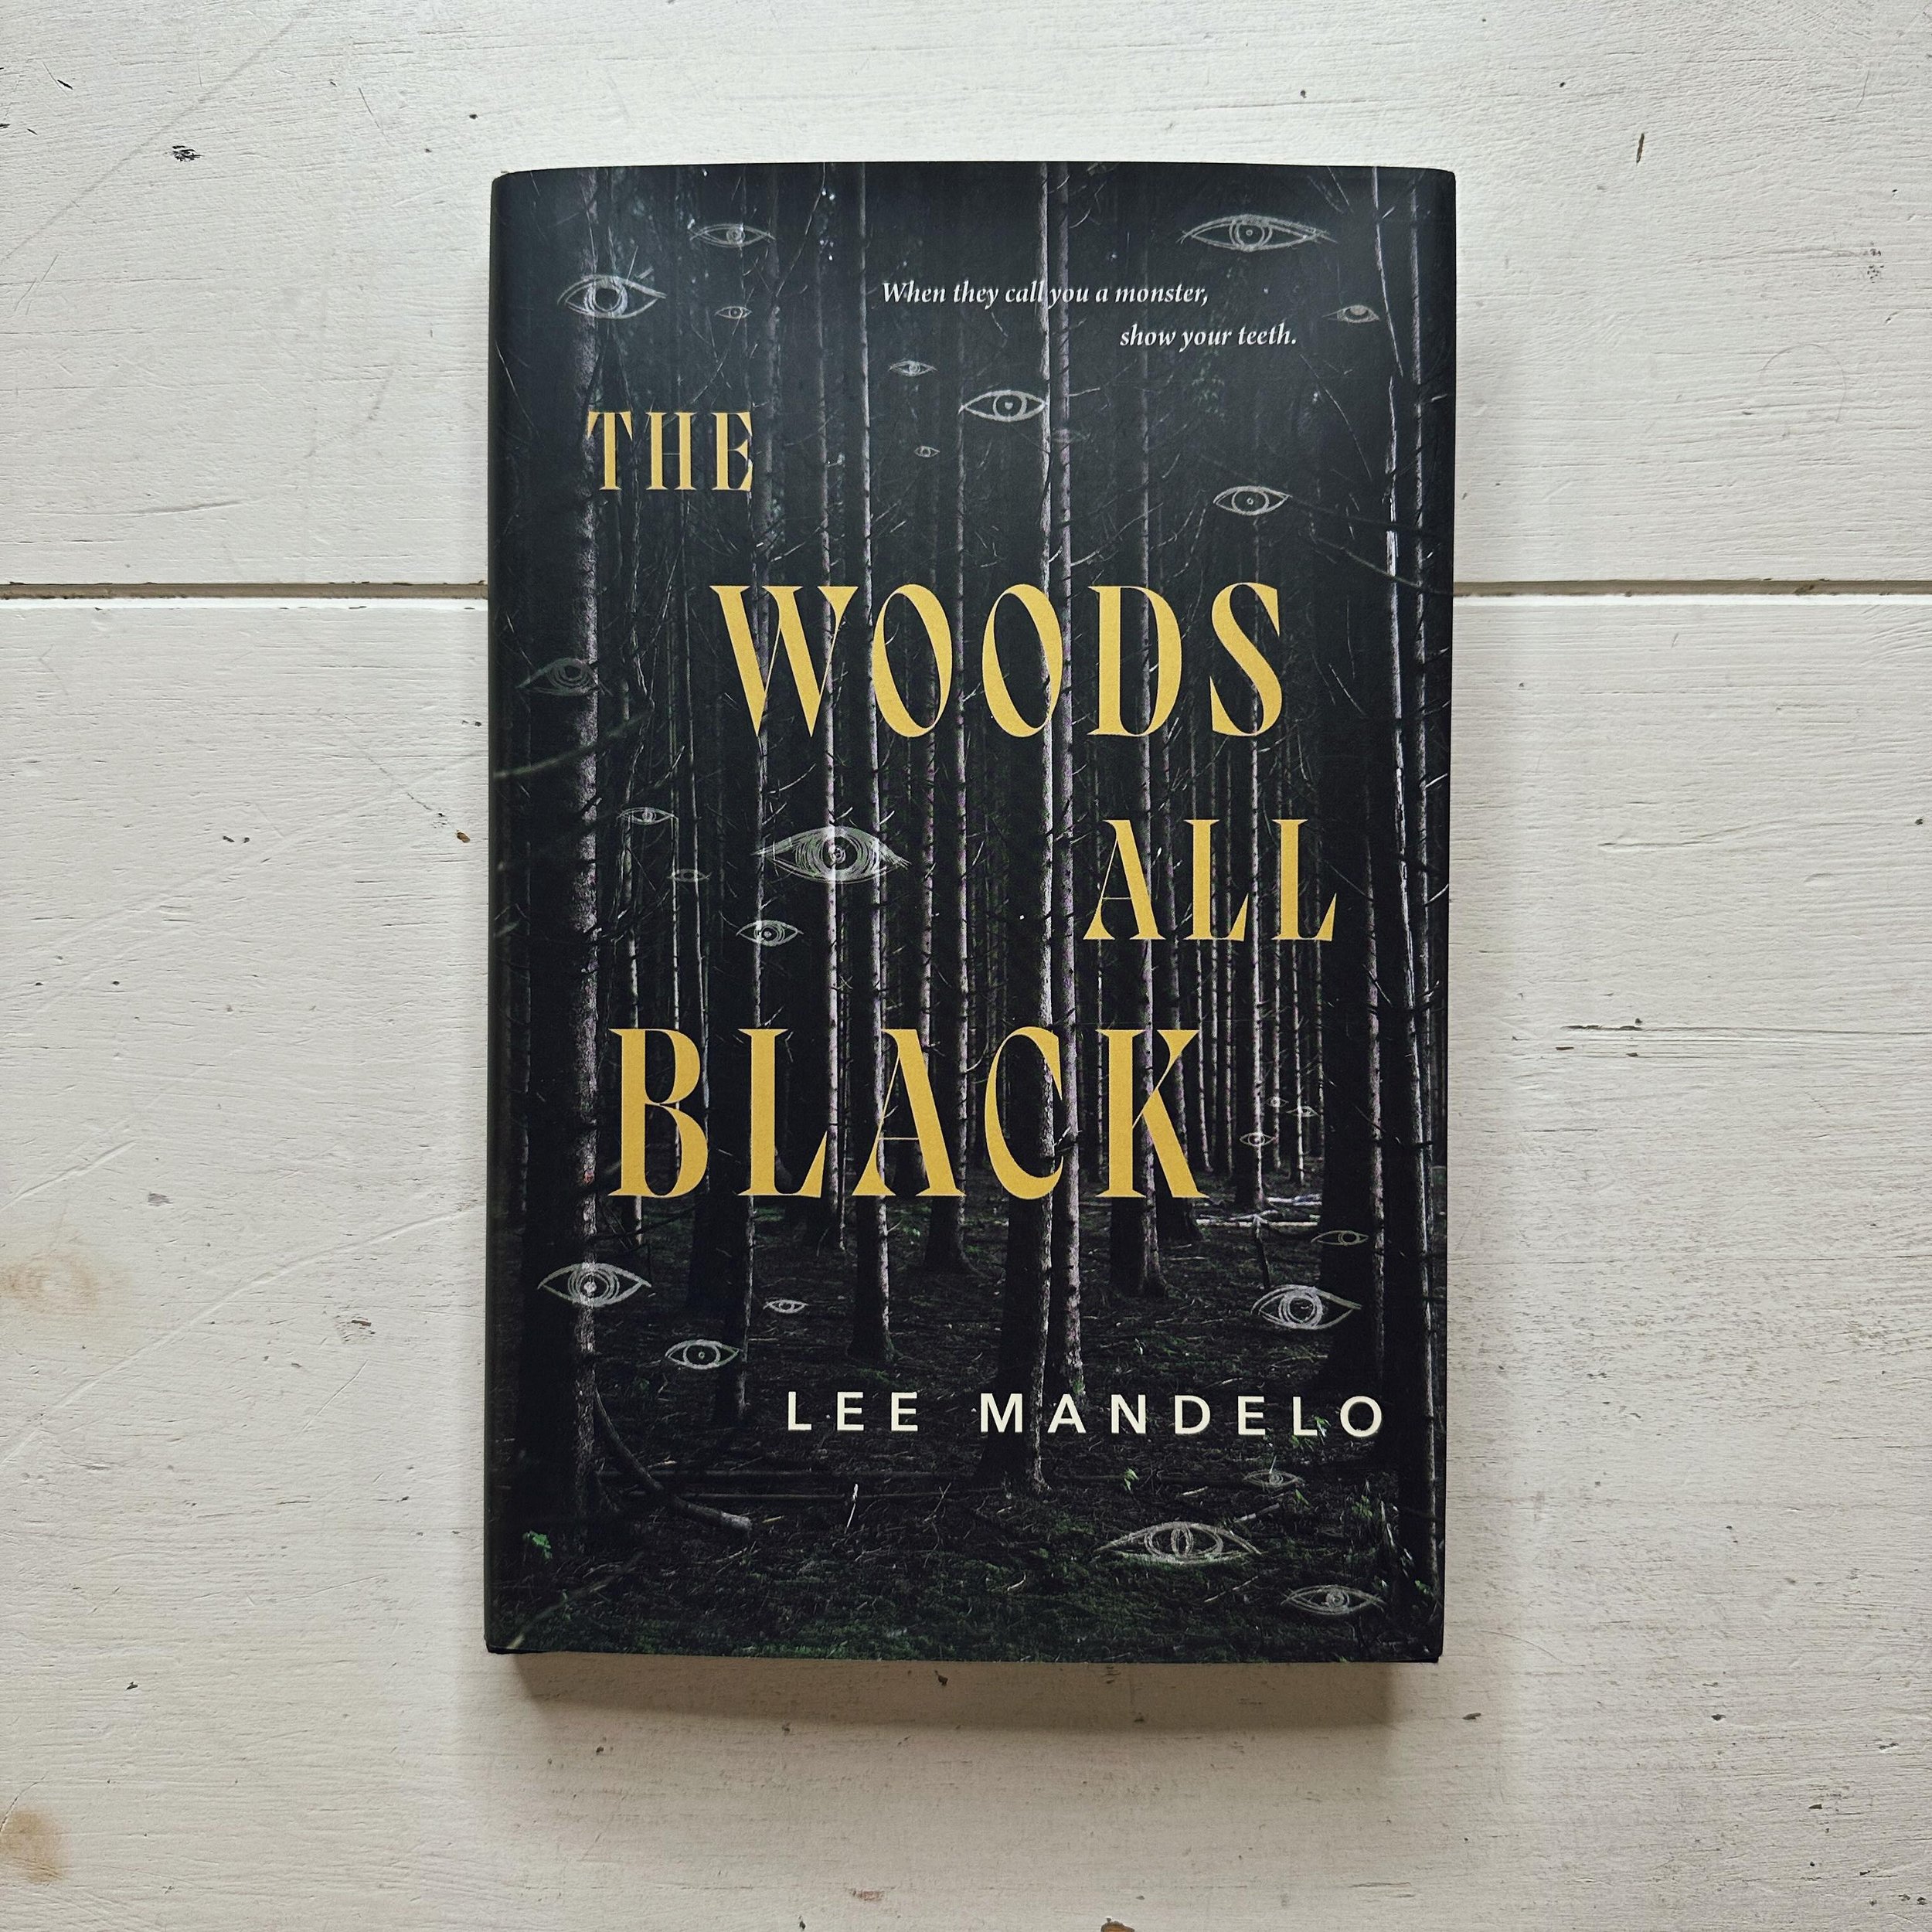 We&rsquo;re excited to announce that our next book club read is #thewoodsallblack by #leemandelo It&rsquo;s not too late to join in. Check out all our other book club reads on Spotify, Apple Podcasts, iHeart, and YouTube. 

#bookclub #horror #spookyb